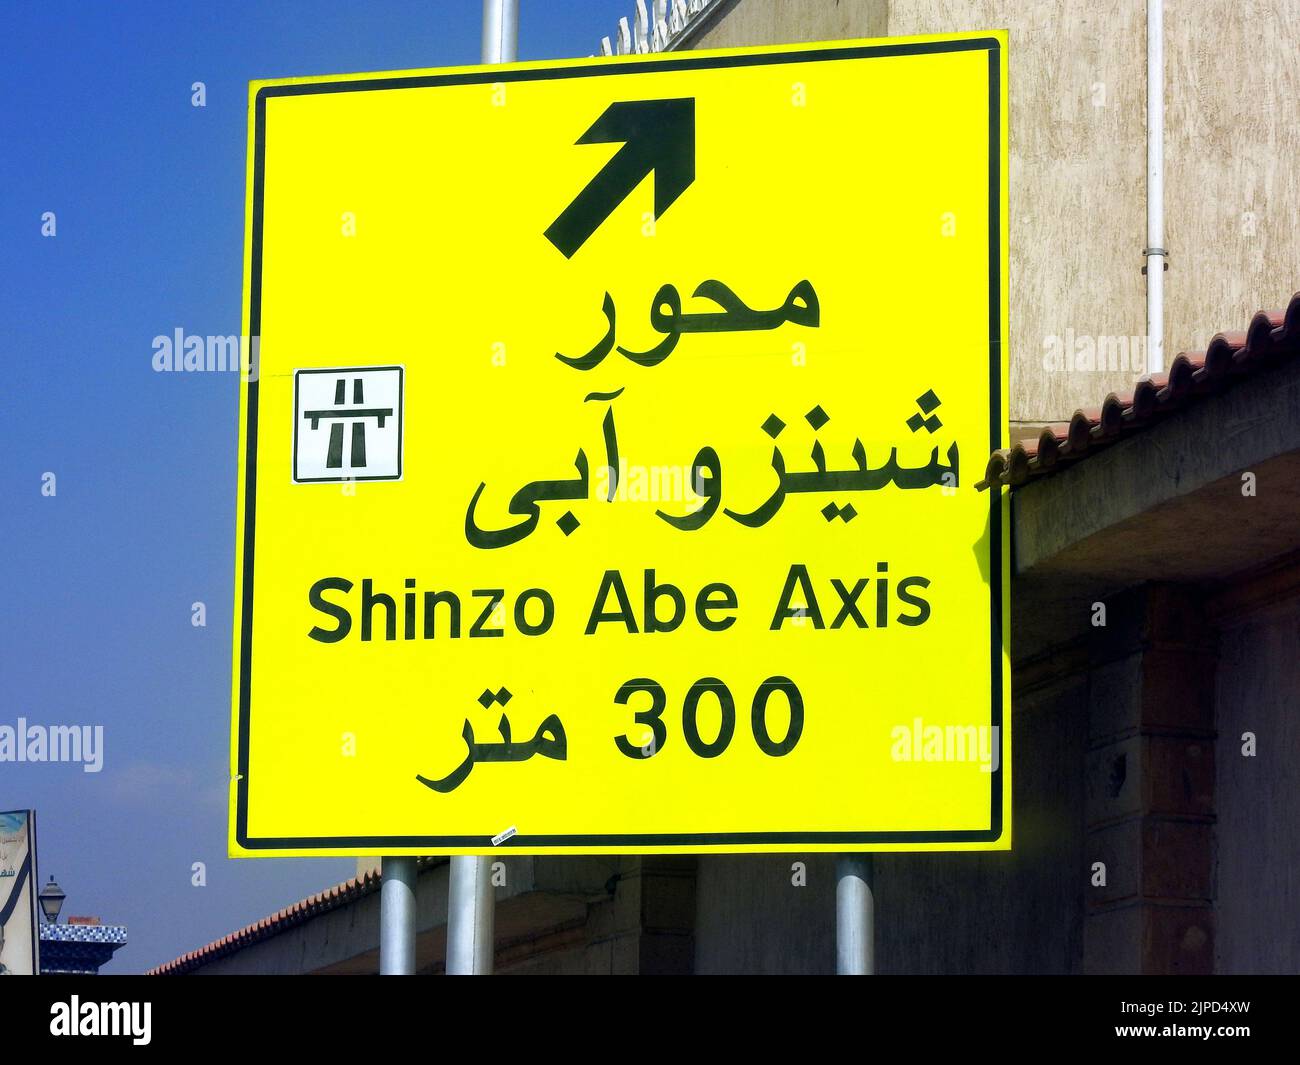 Cairo, Egypt, July 31 2022: A direction road sign in Egypt, Translation of Arabic text (Shinzo Abe Axis 300 meters), new patrol highway named on forme Stock Photo